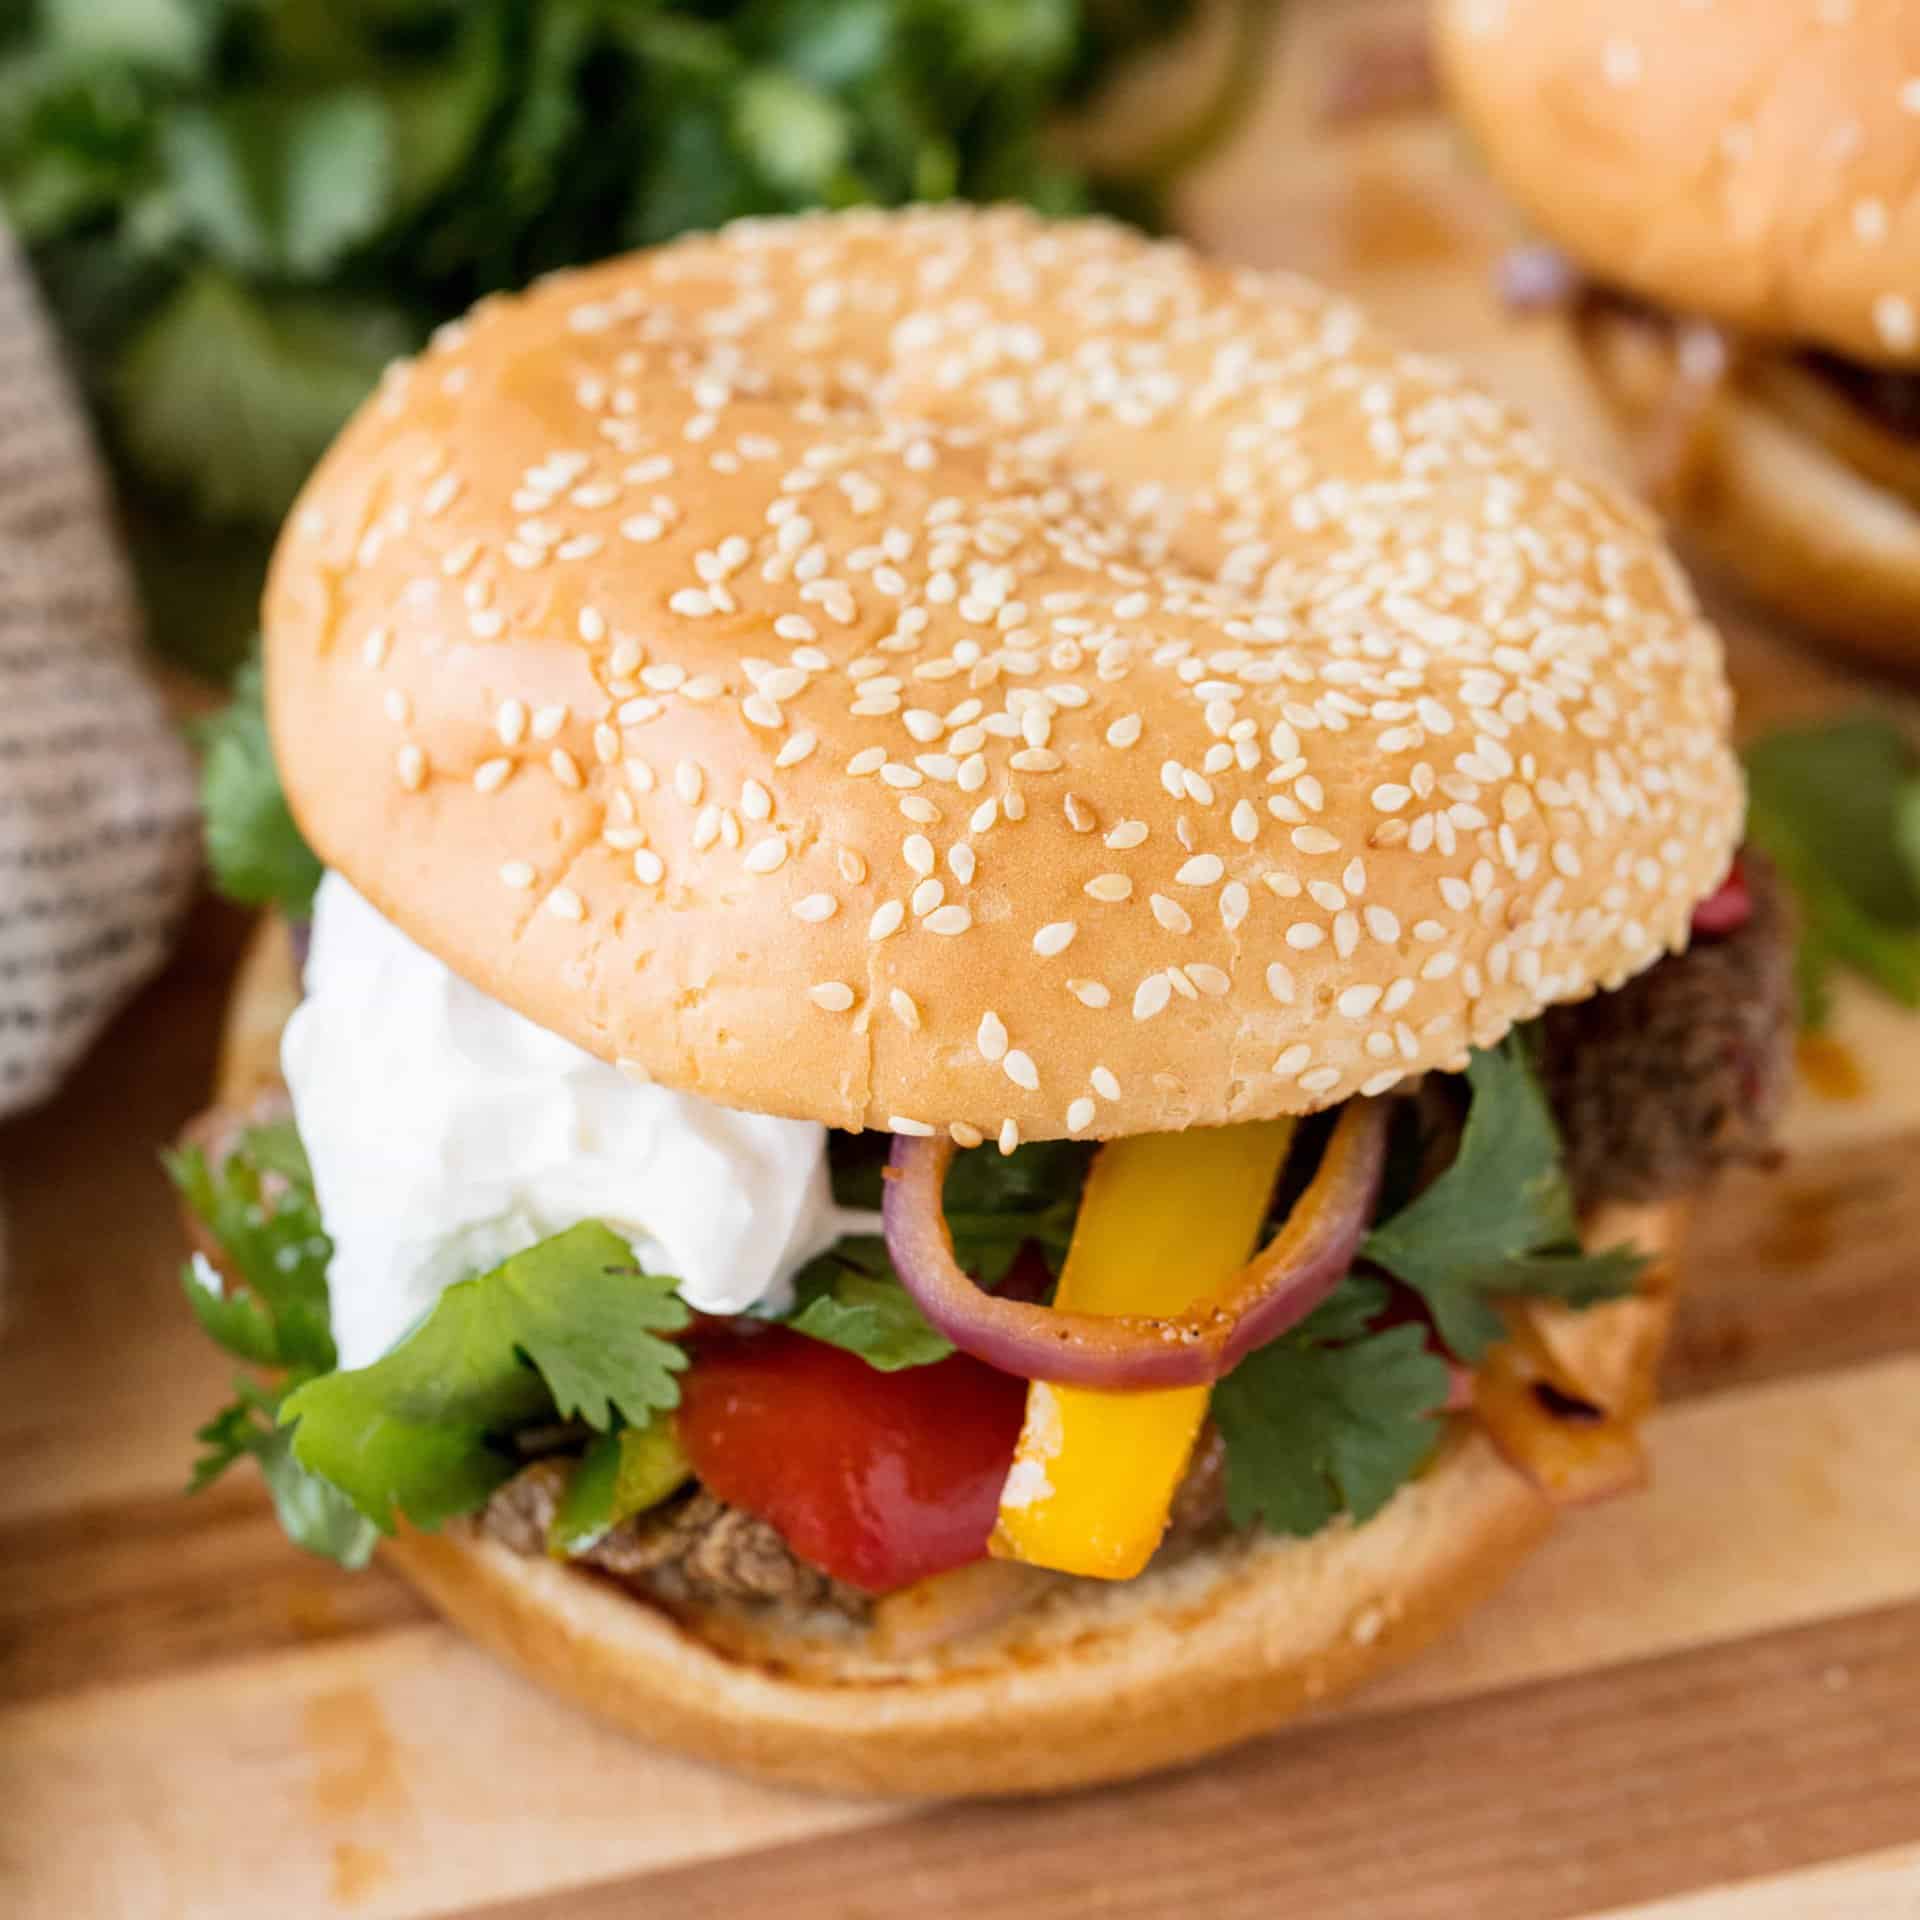 Fajita Burgers take all the flavors of fajitas that you love and combines it into a delicious burger that's perfect for any backyard barbecue!